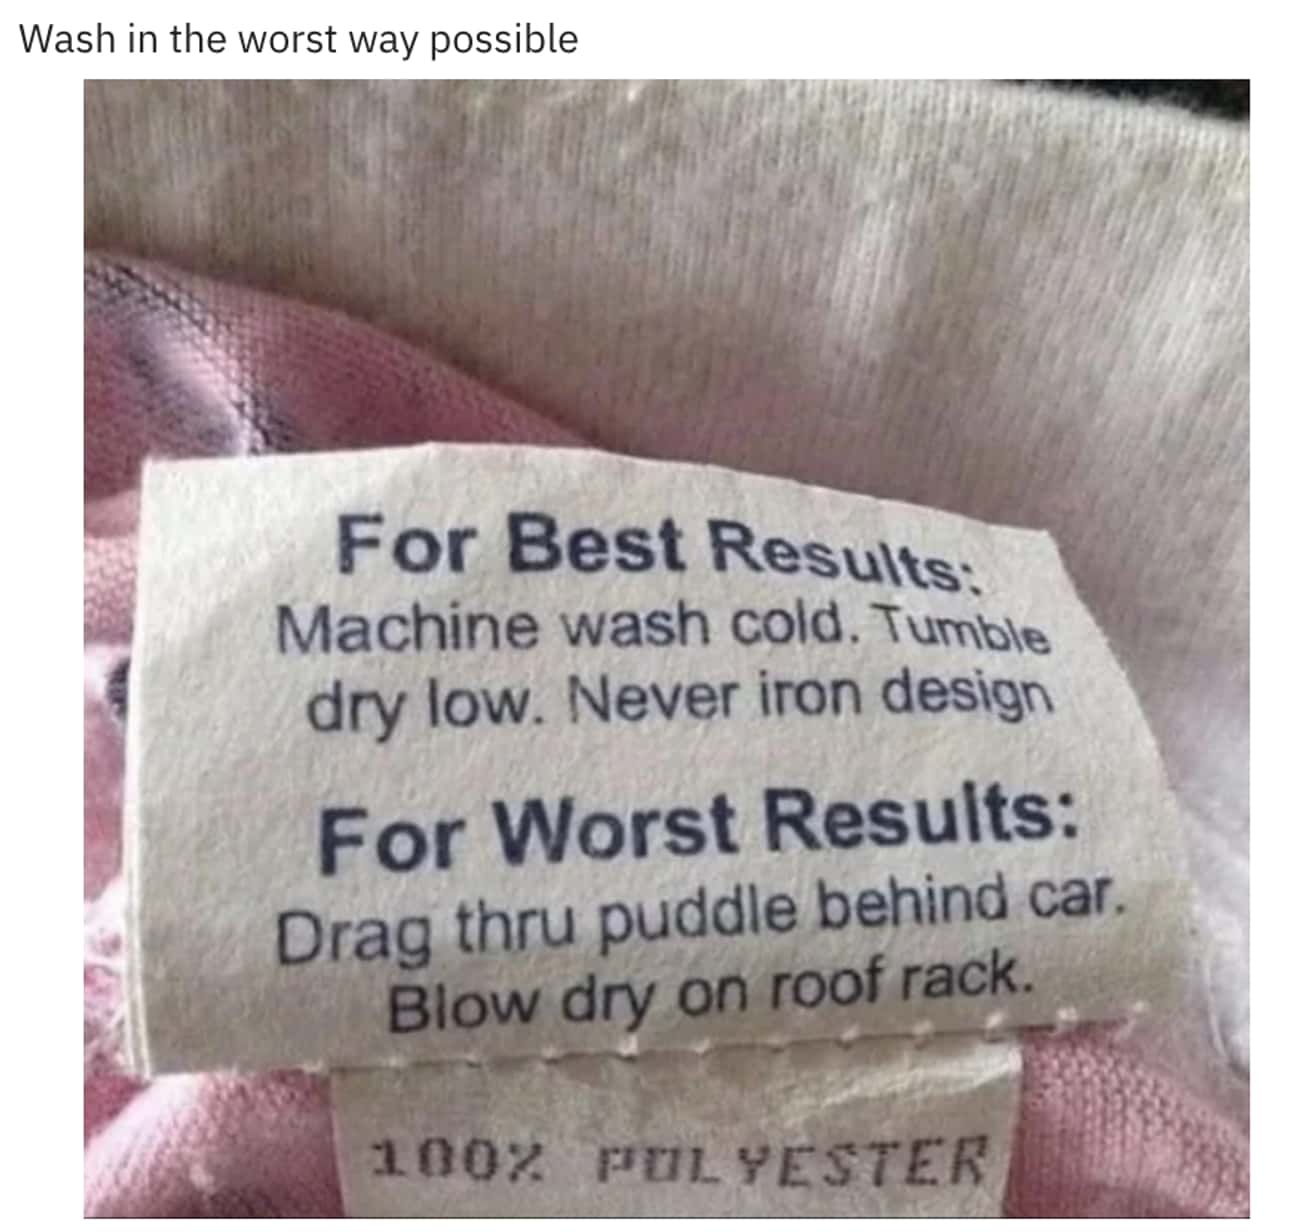 Worst Results